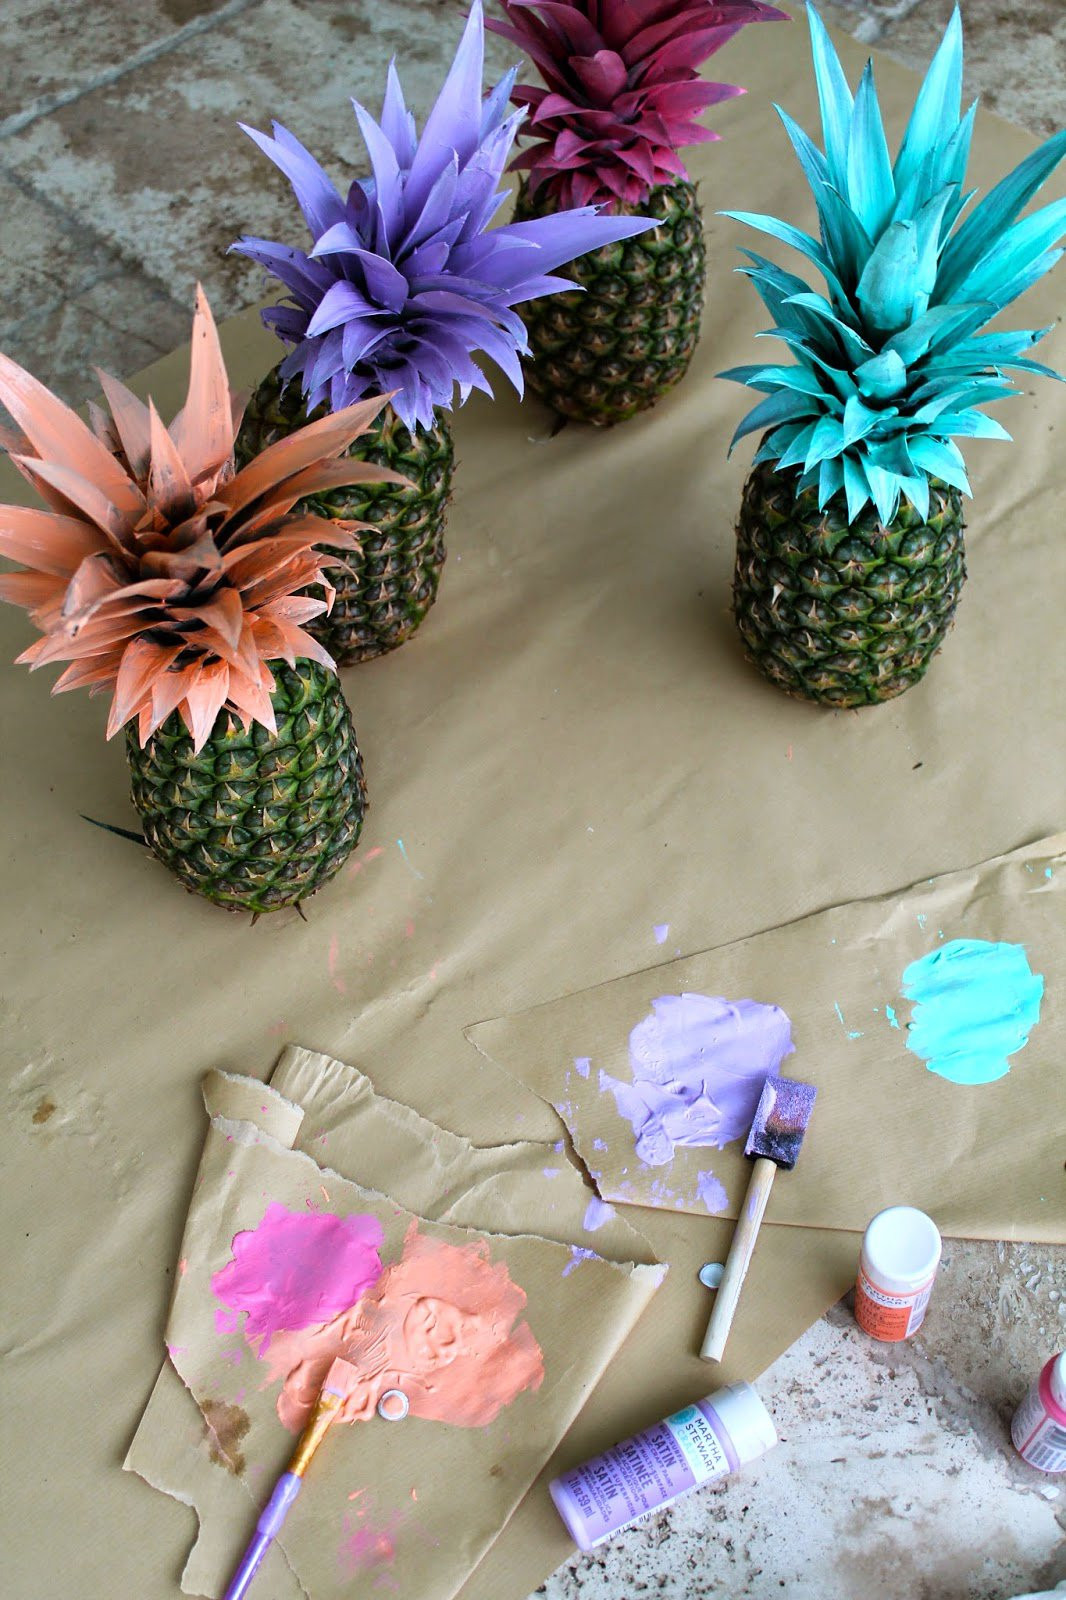 Decorating Ideas For A Summer Party
 Original decorating ideas for summer parties